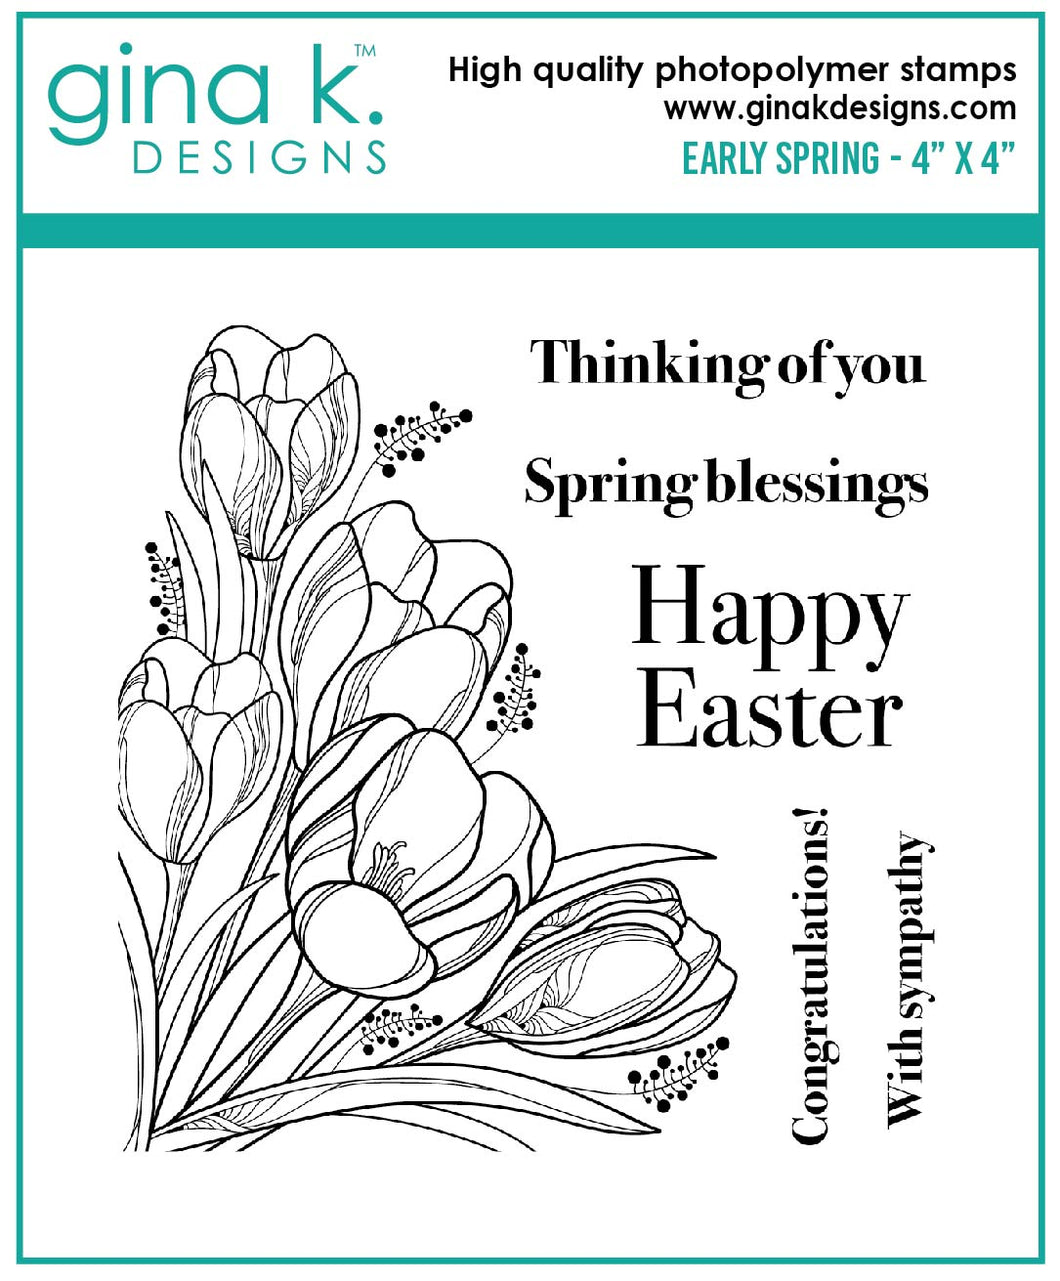 Gina K. Designs - Stamps - Early Spring. Early Spring is a stamp set by Gina K Designs. This set is made of premium clear photopolymer and measures 4